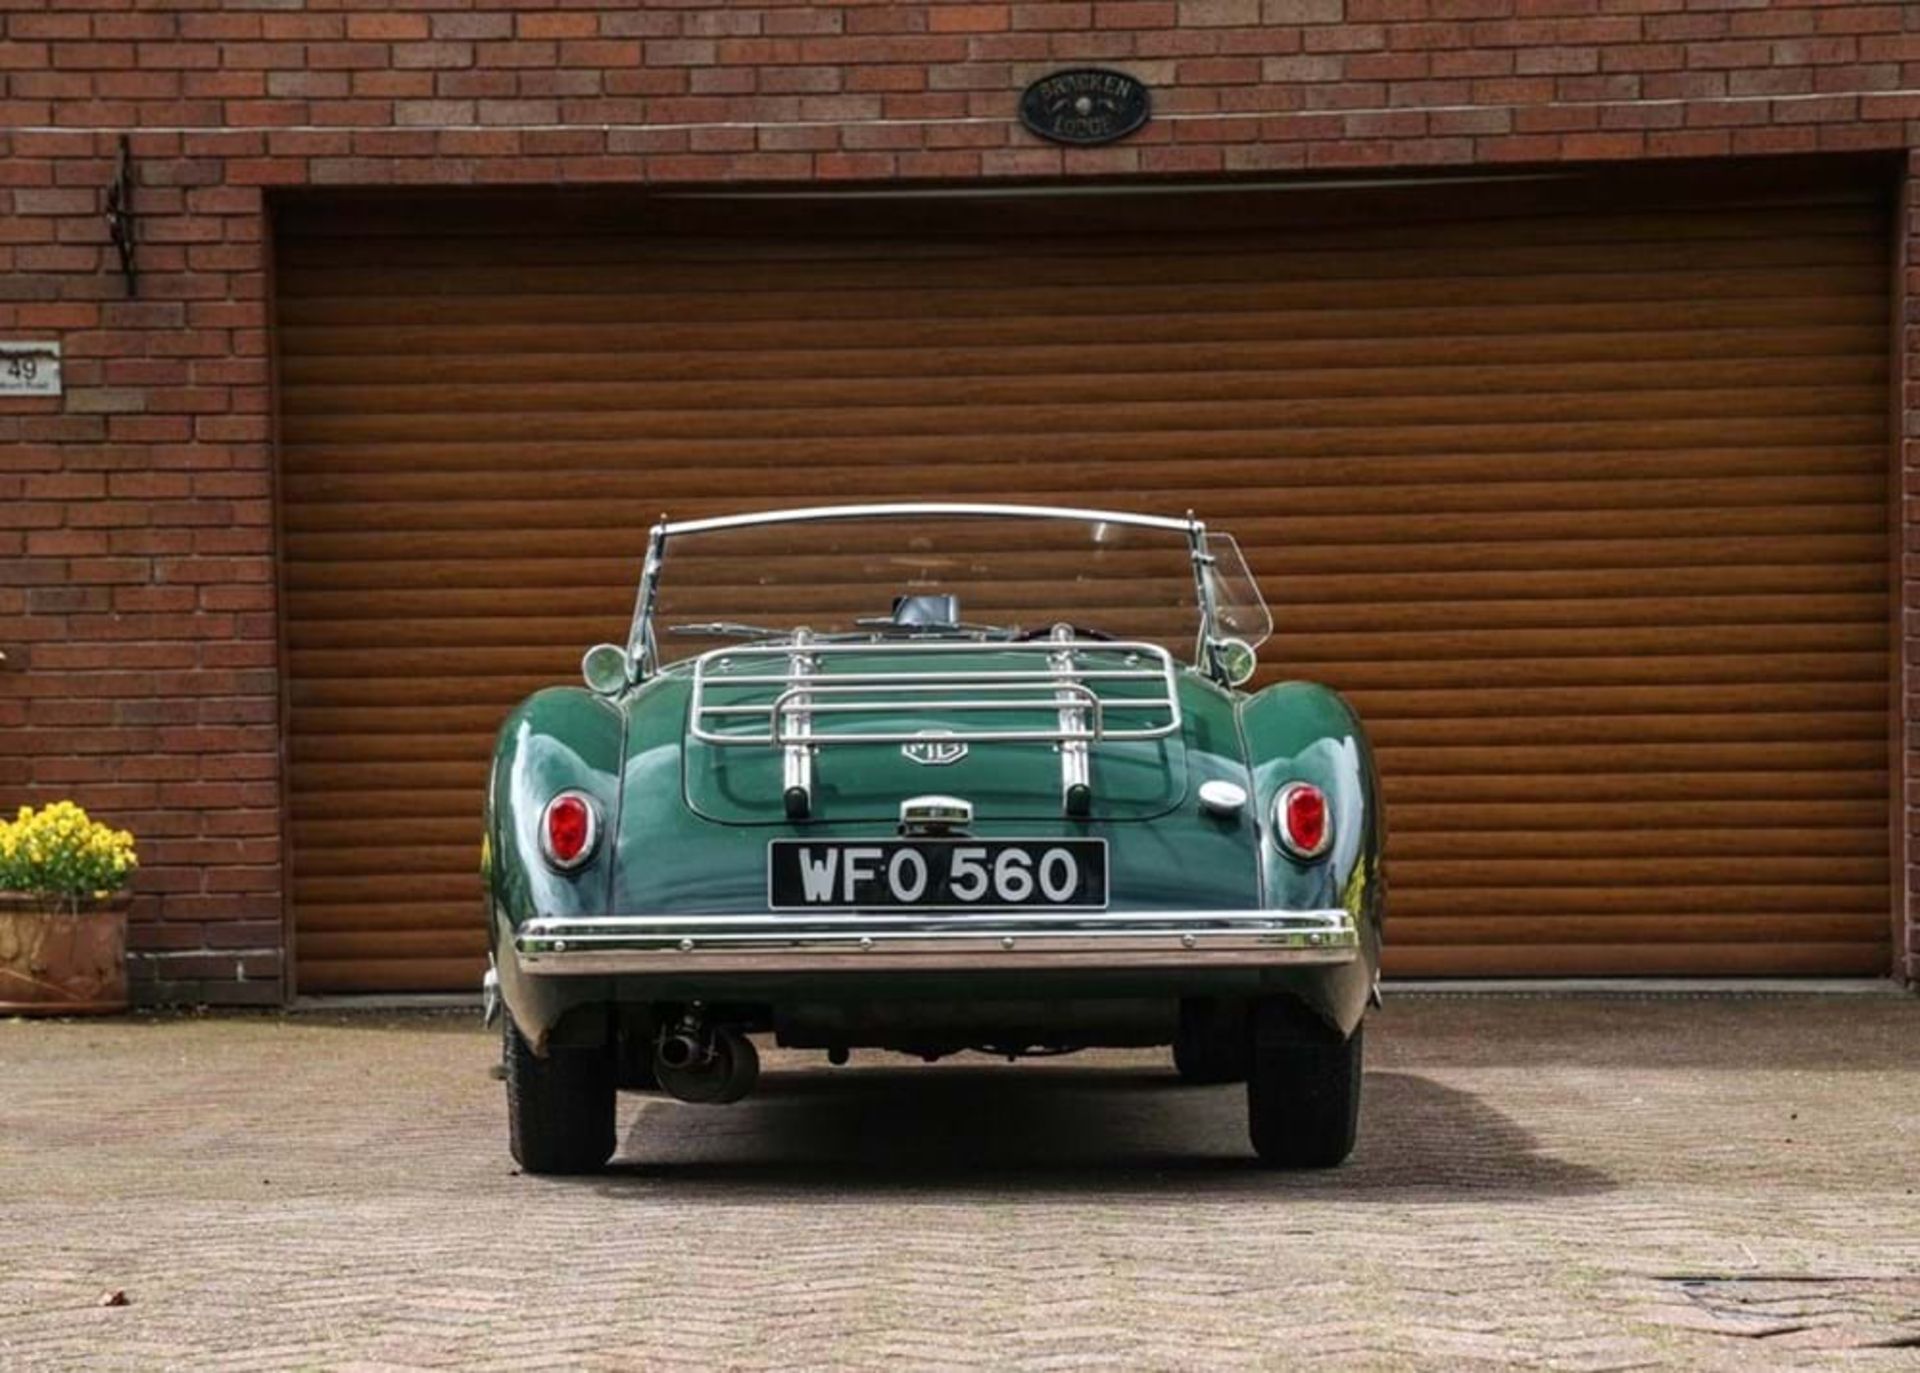 1957 MG A Roadster (1500) - Image 7 of 10